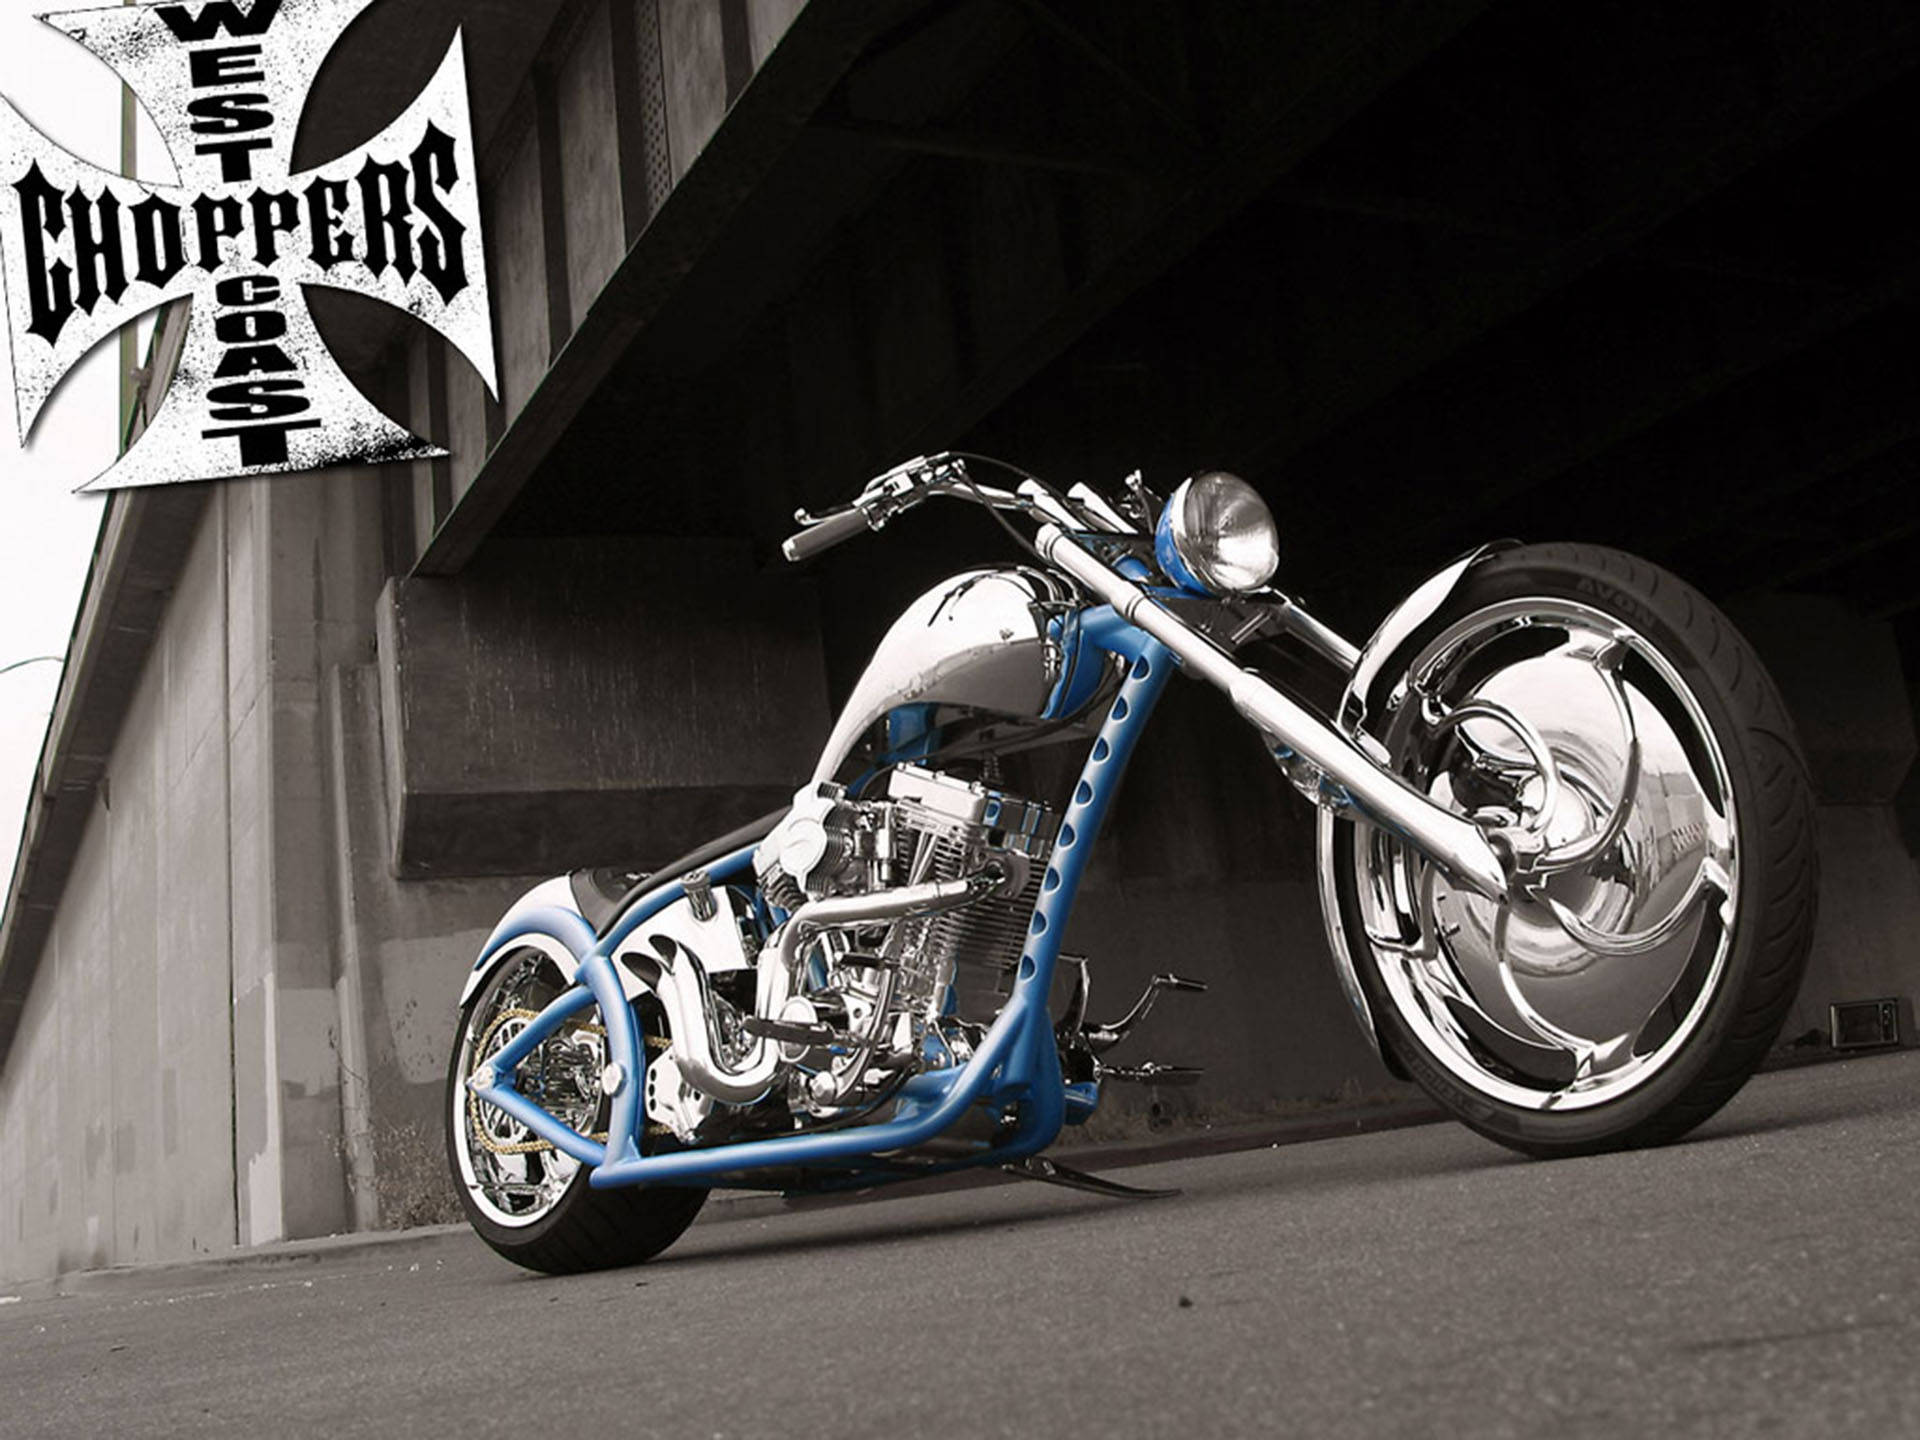 [100 ] West Coast Choppers Wallpapers